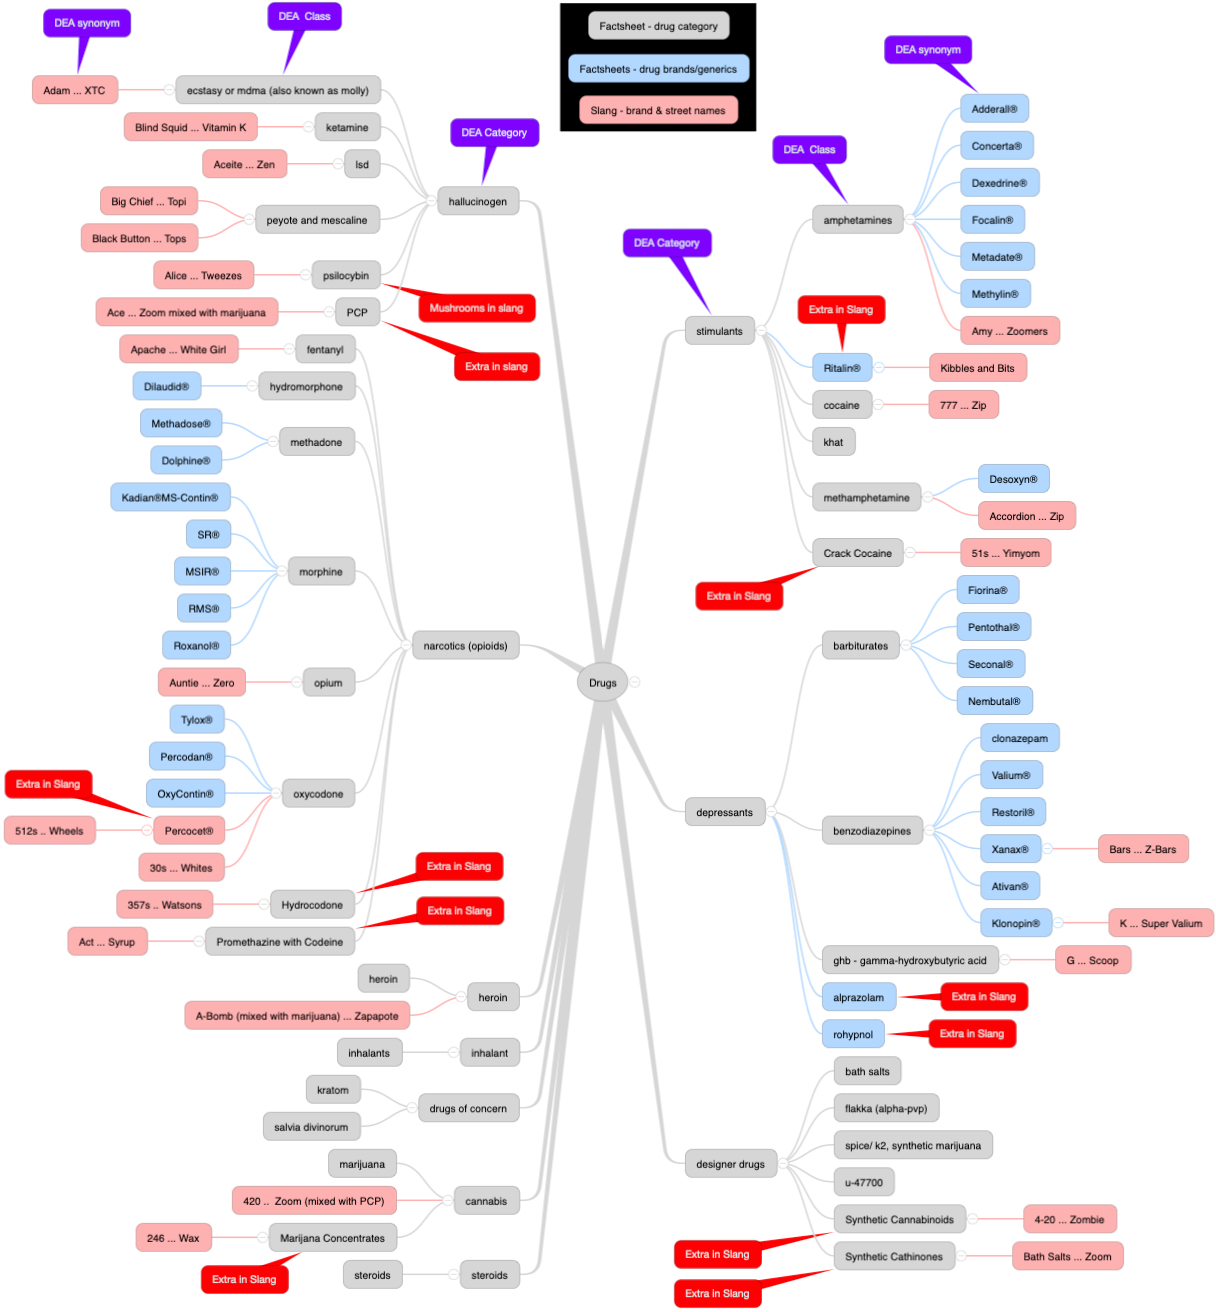 Figure 1 shows the DEA website drug ontology. Problematic entries shown with a red callout.